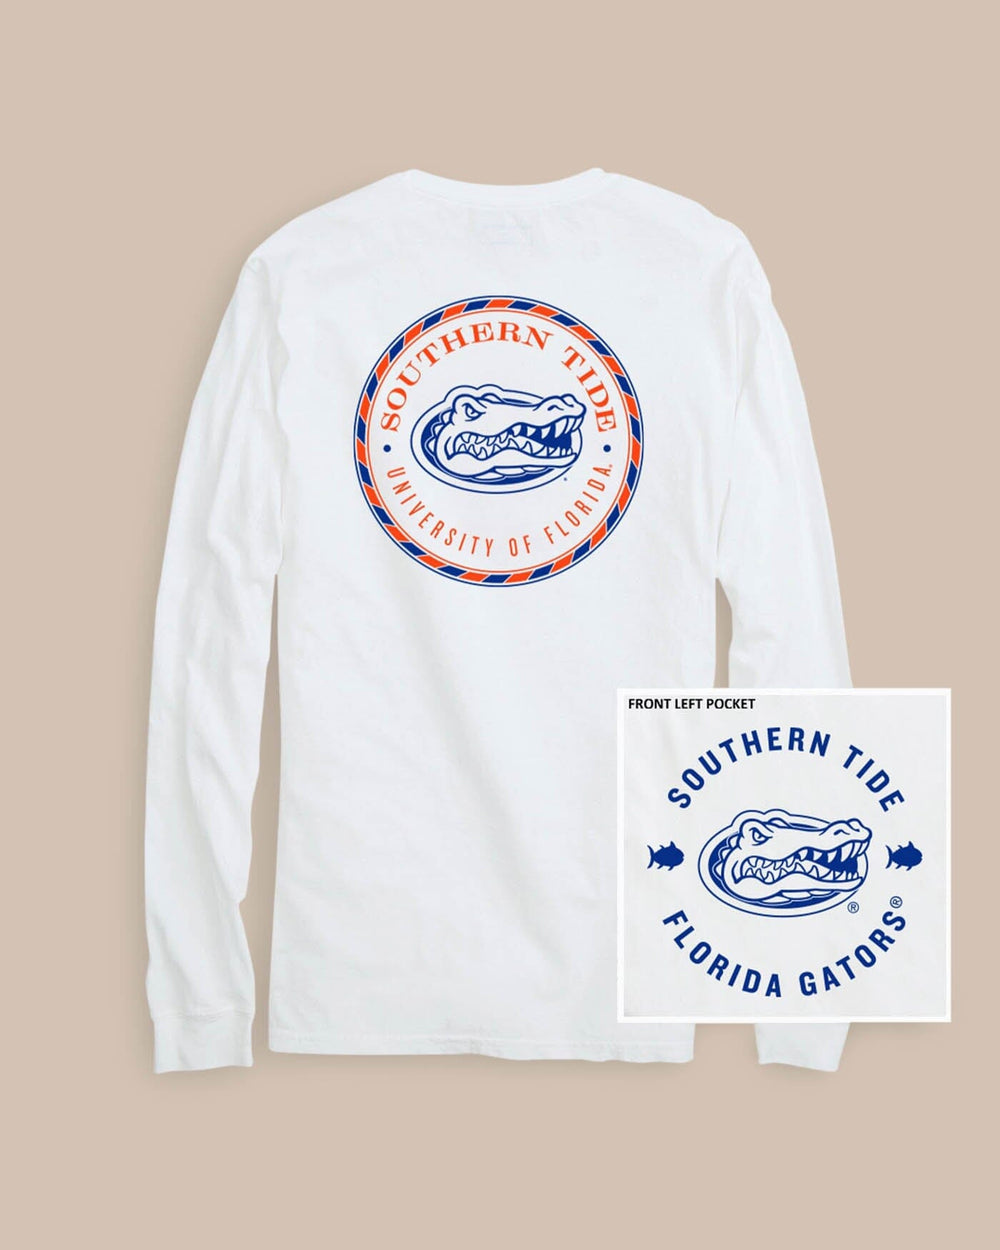 The front and back of the Florida Gators Long Sleeve Medallion Logo T-Shirt by Southern Tide - Classic White